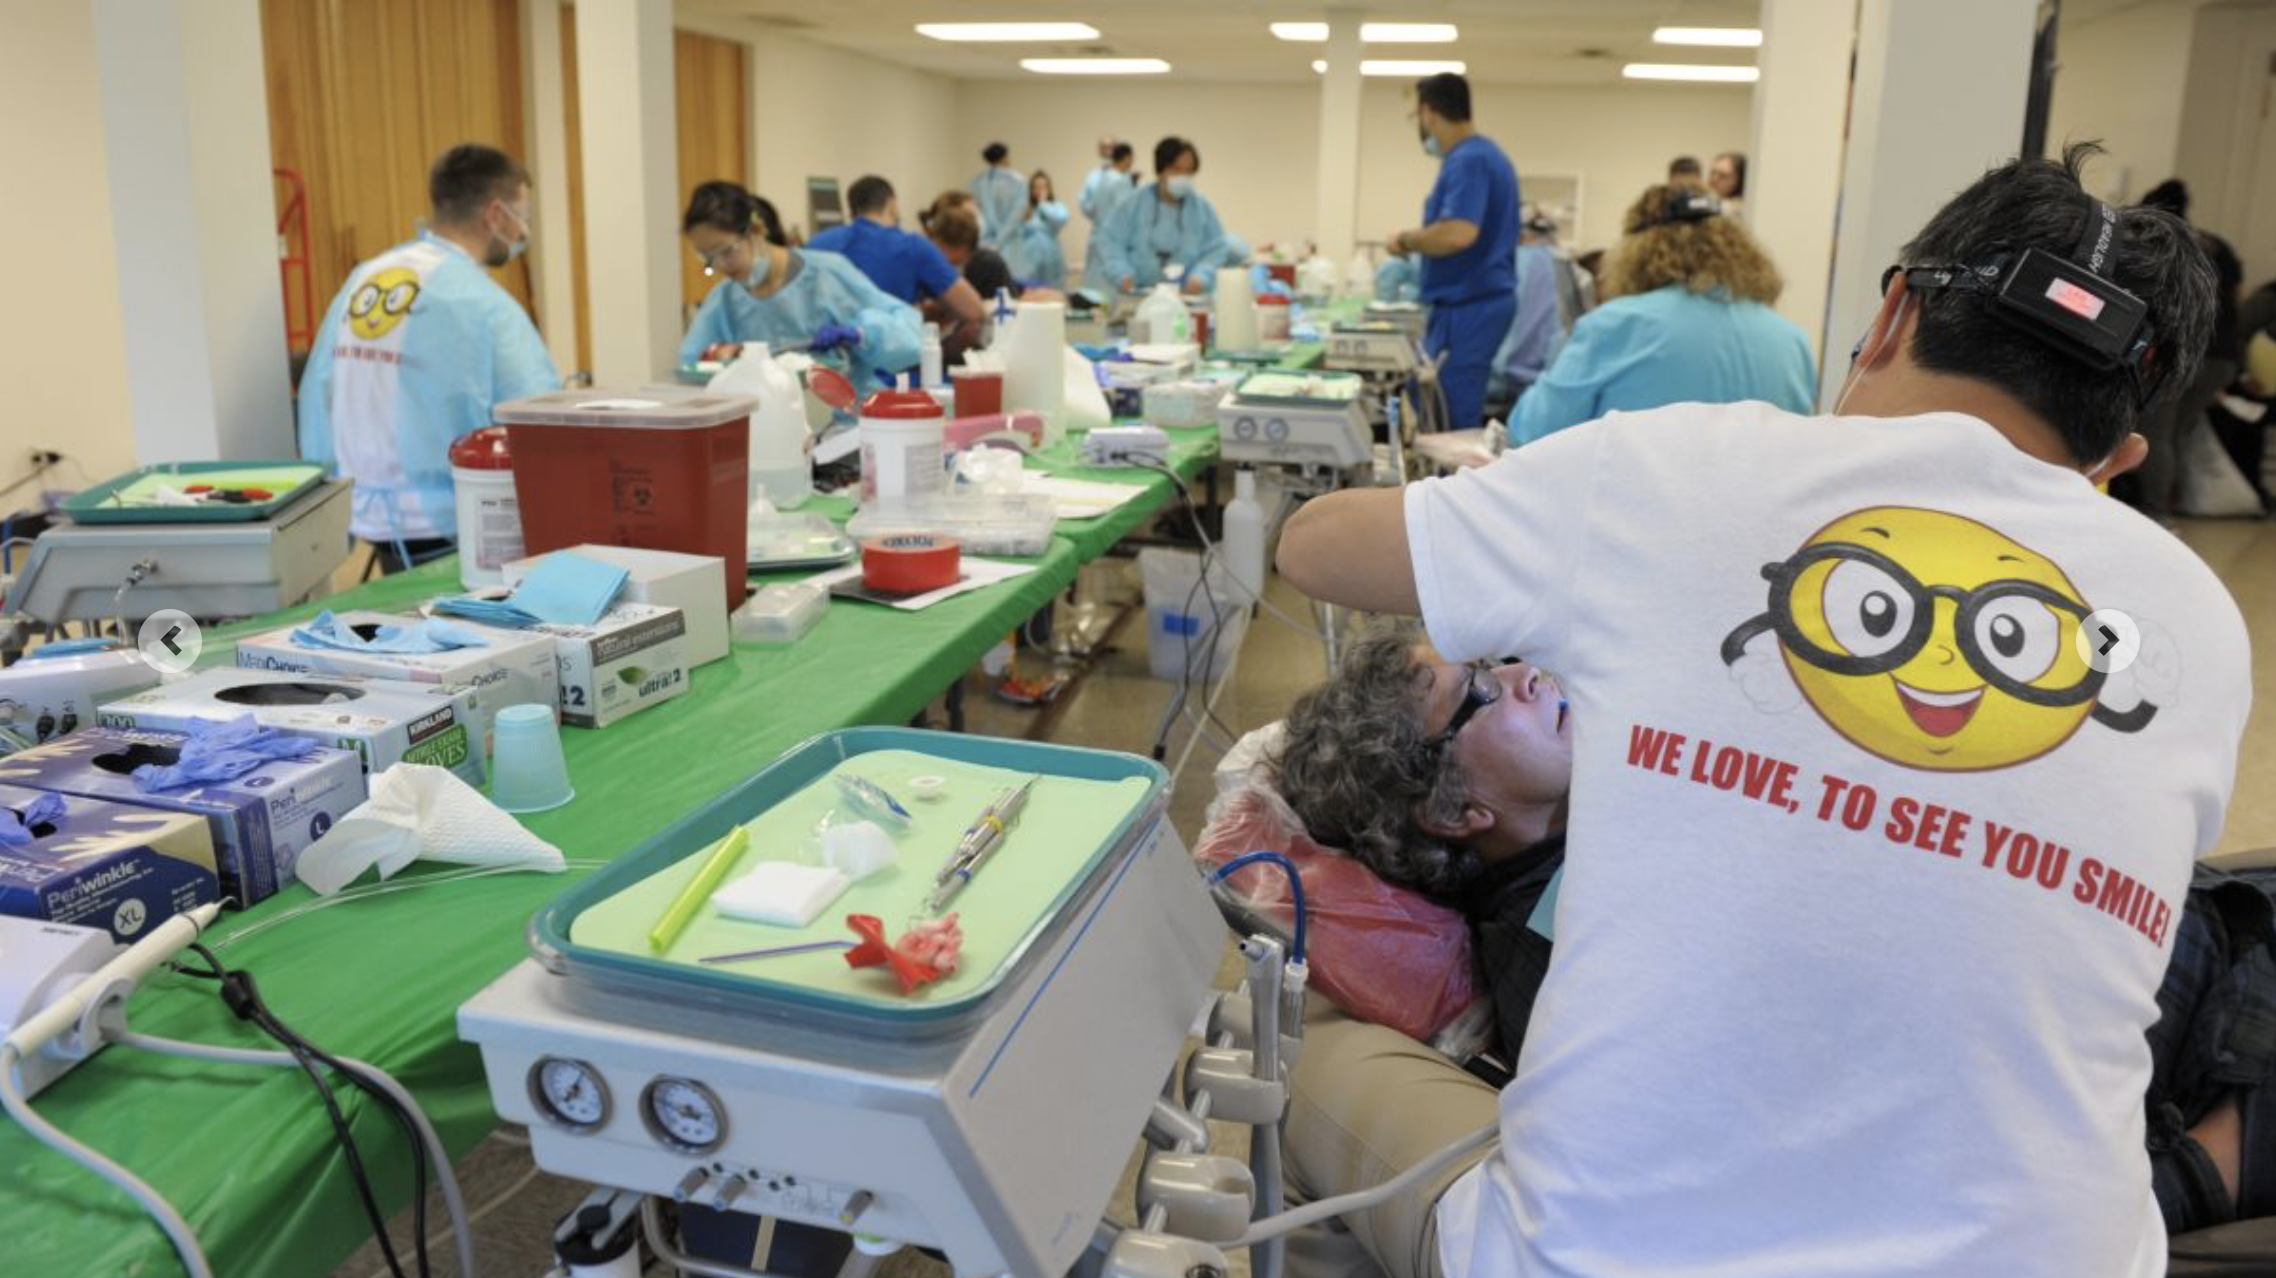 Elgin church in Illinois helps the community through one of its dental clinics.